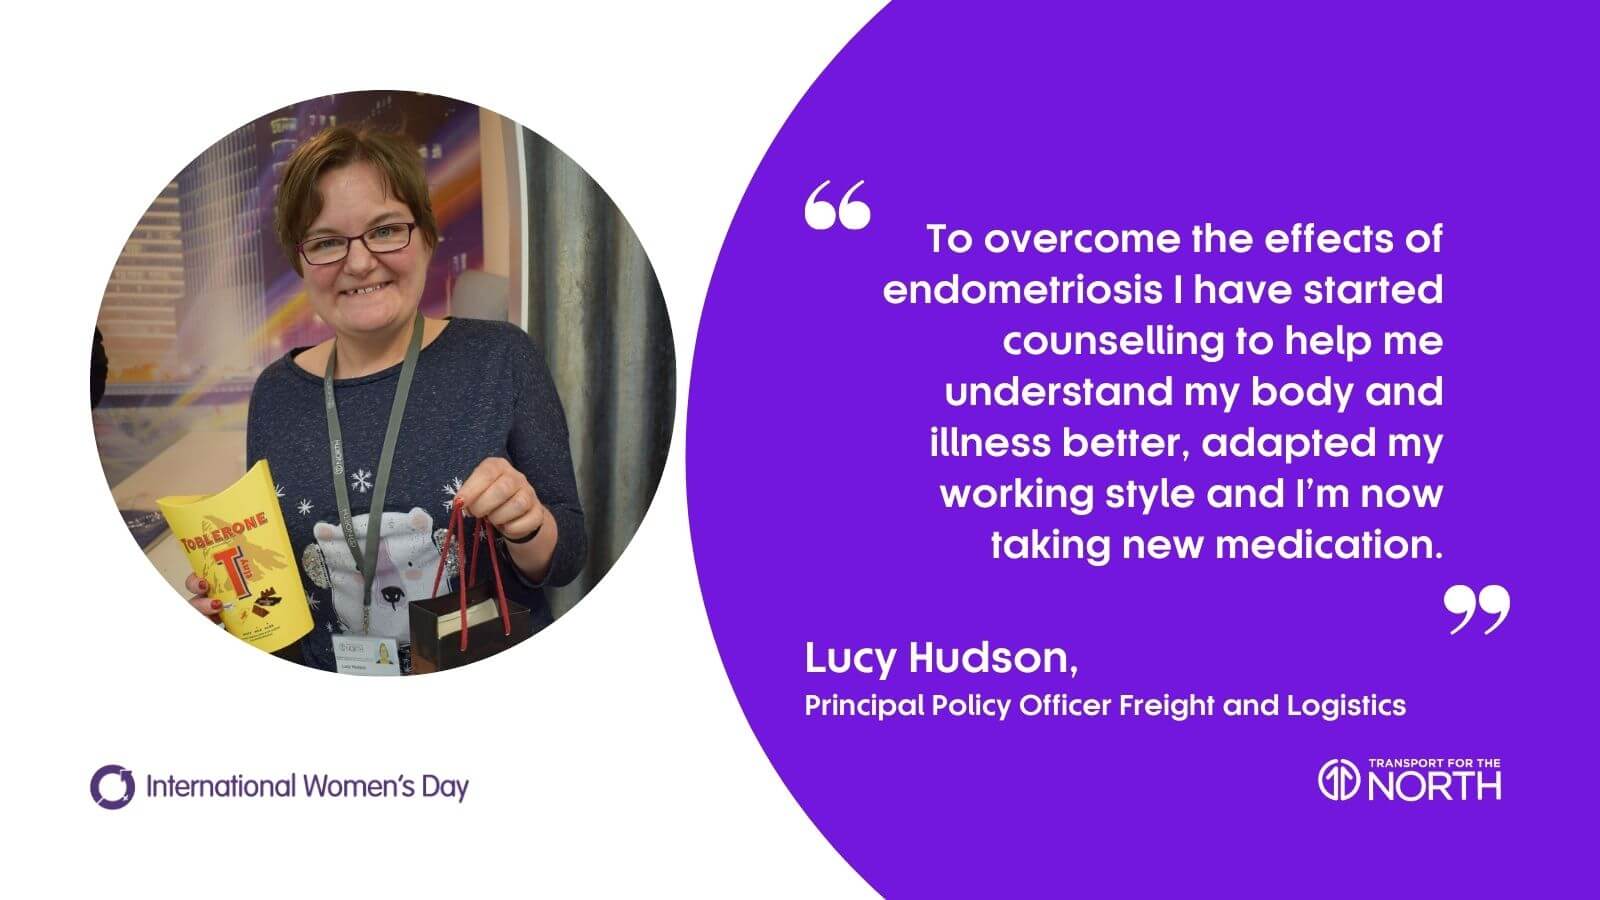 Lucy Hudson, Principal Policy Officer Freight and Logistics on International Women’s Day 2021